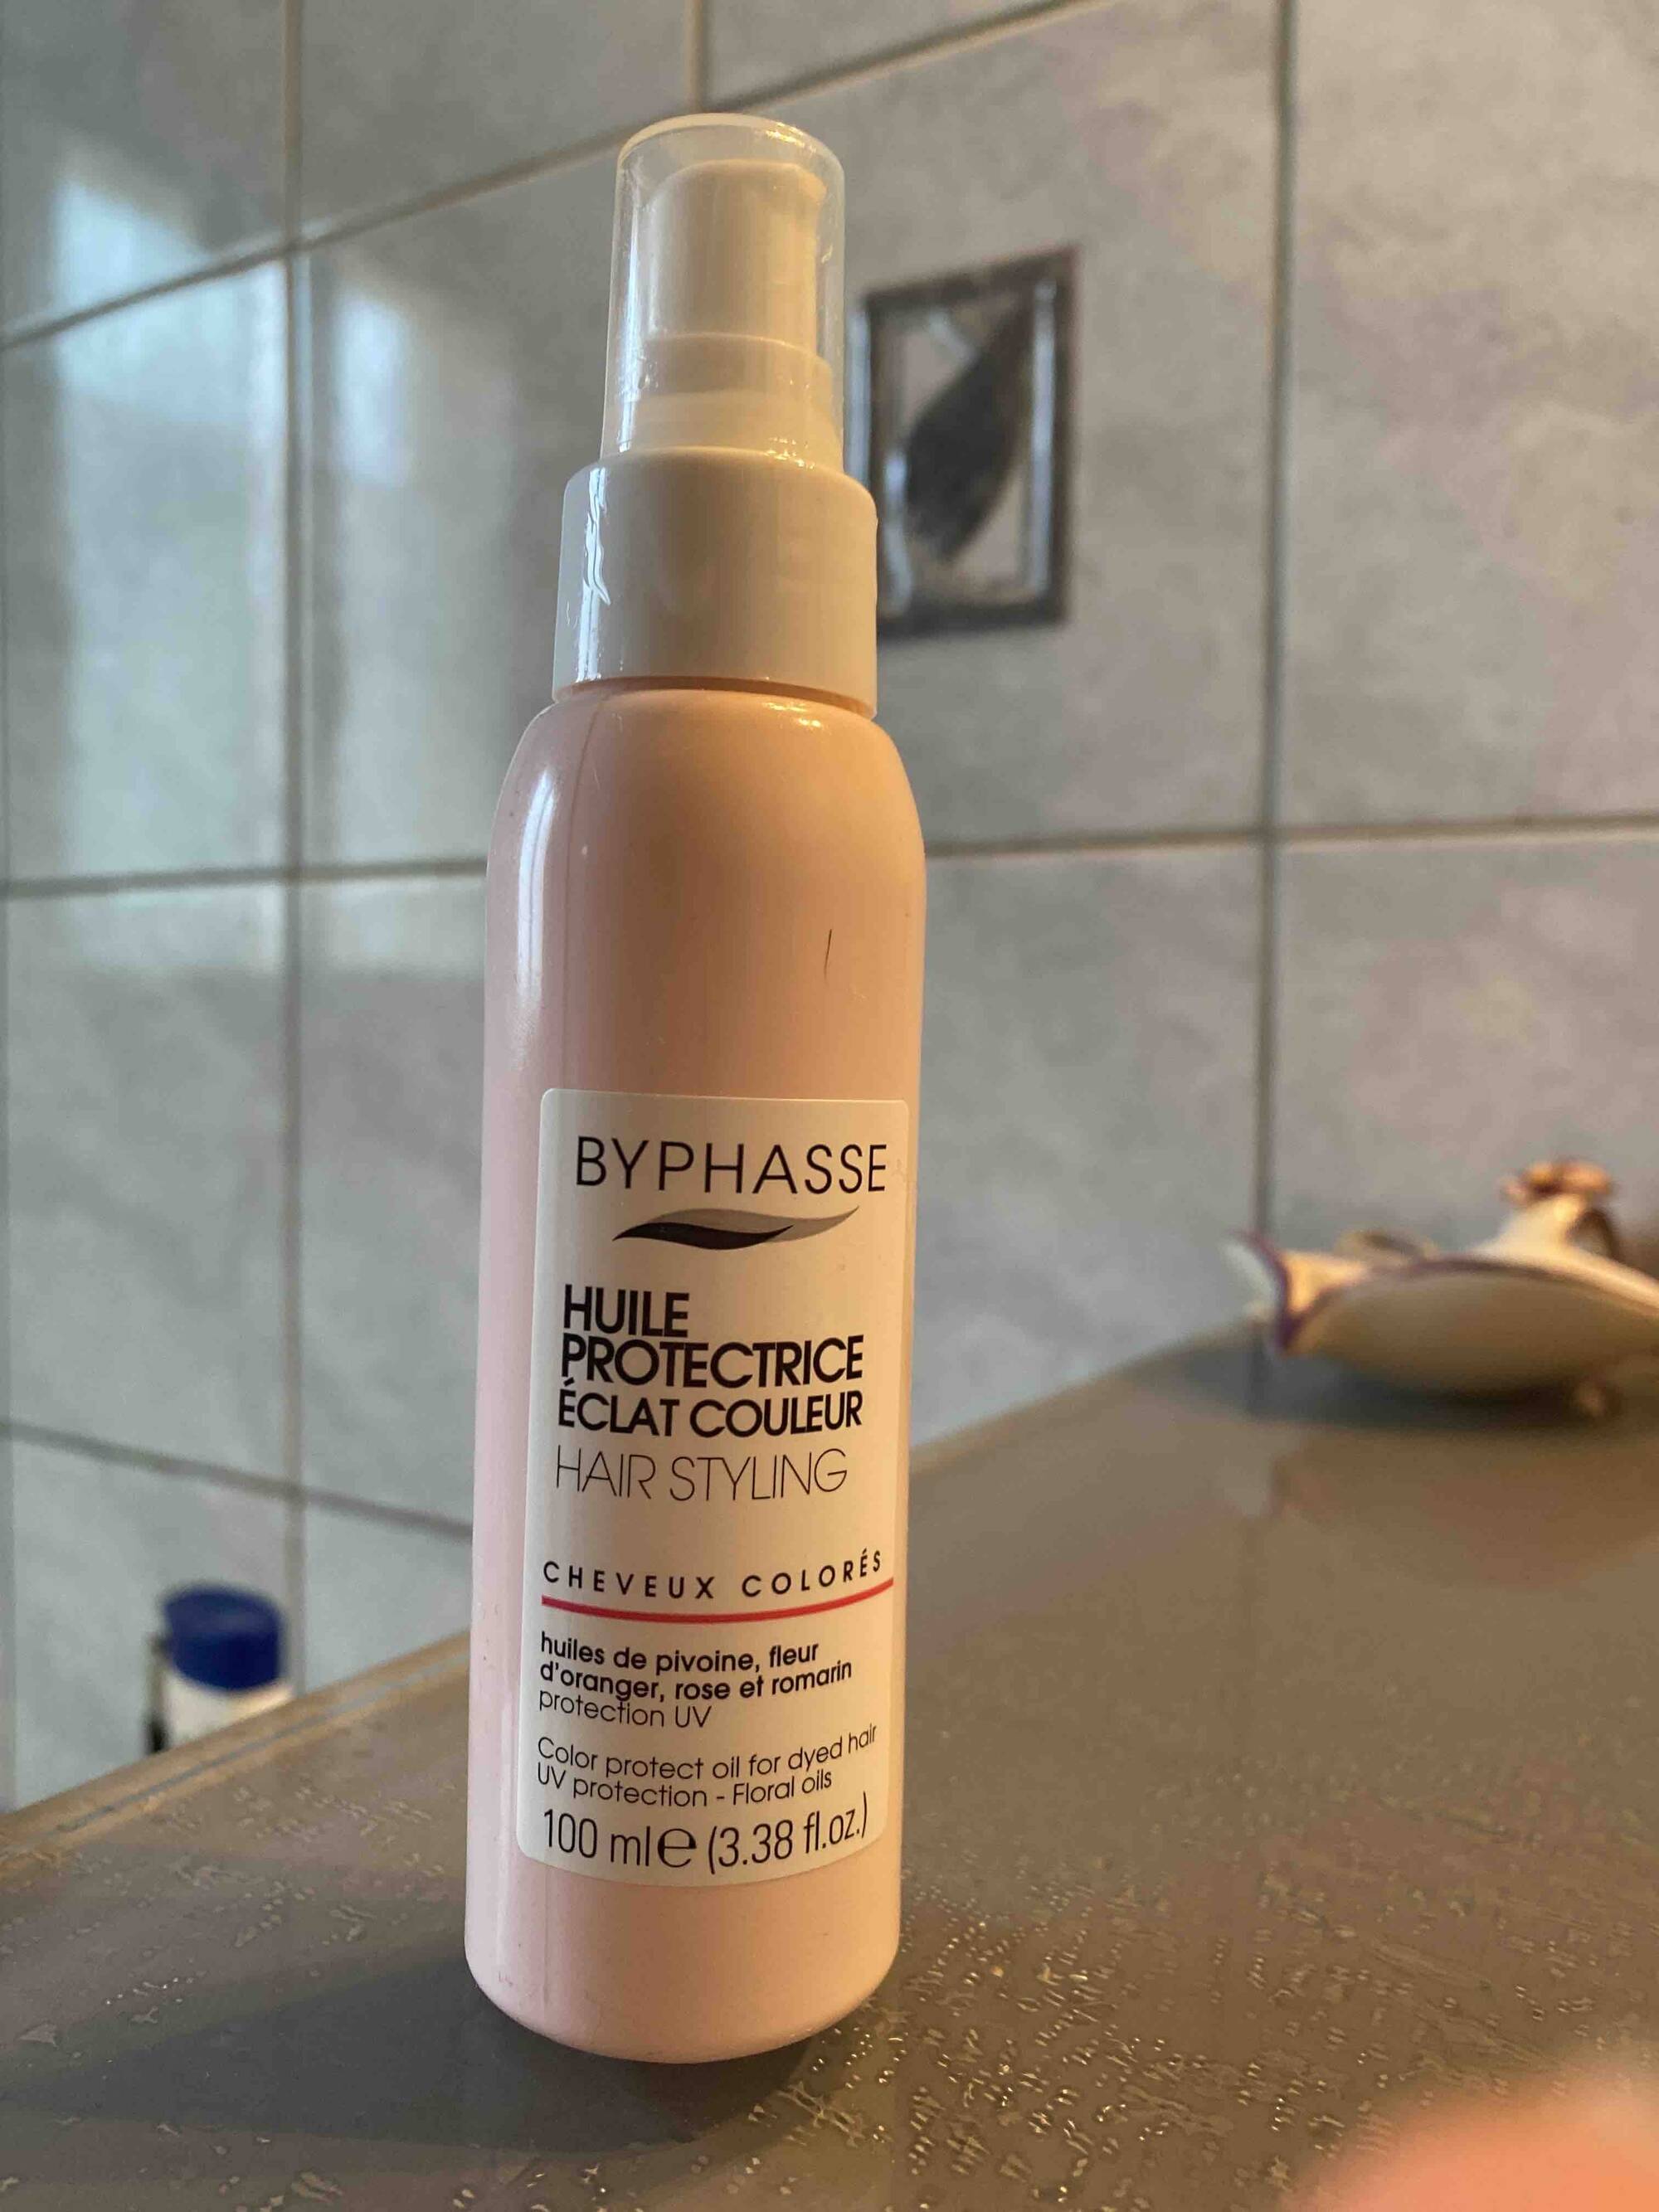 BYPHASSE - Huile protectrice éclat couleur